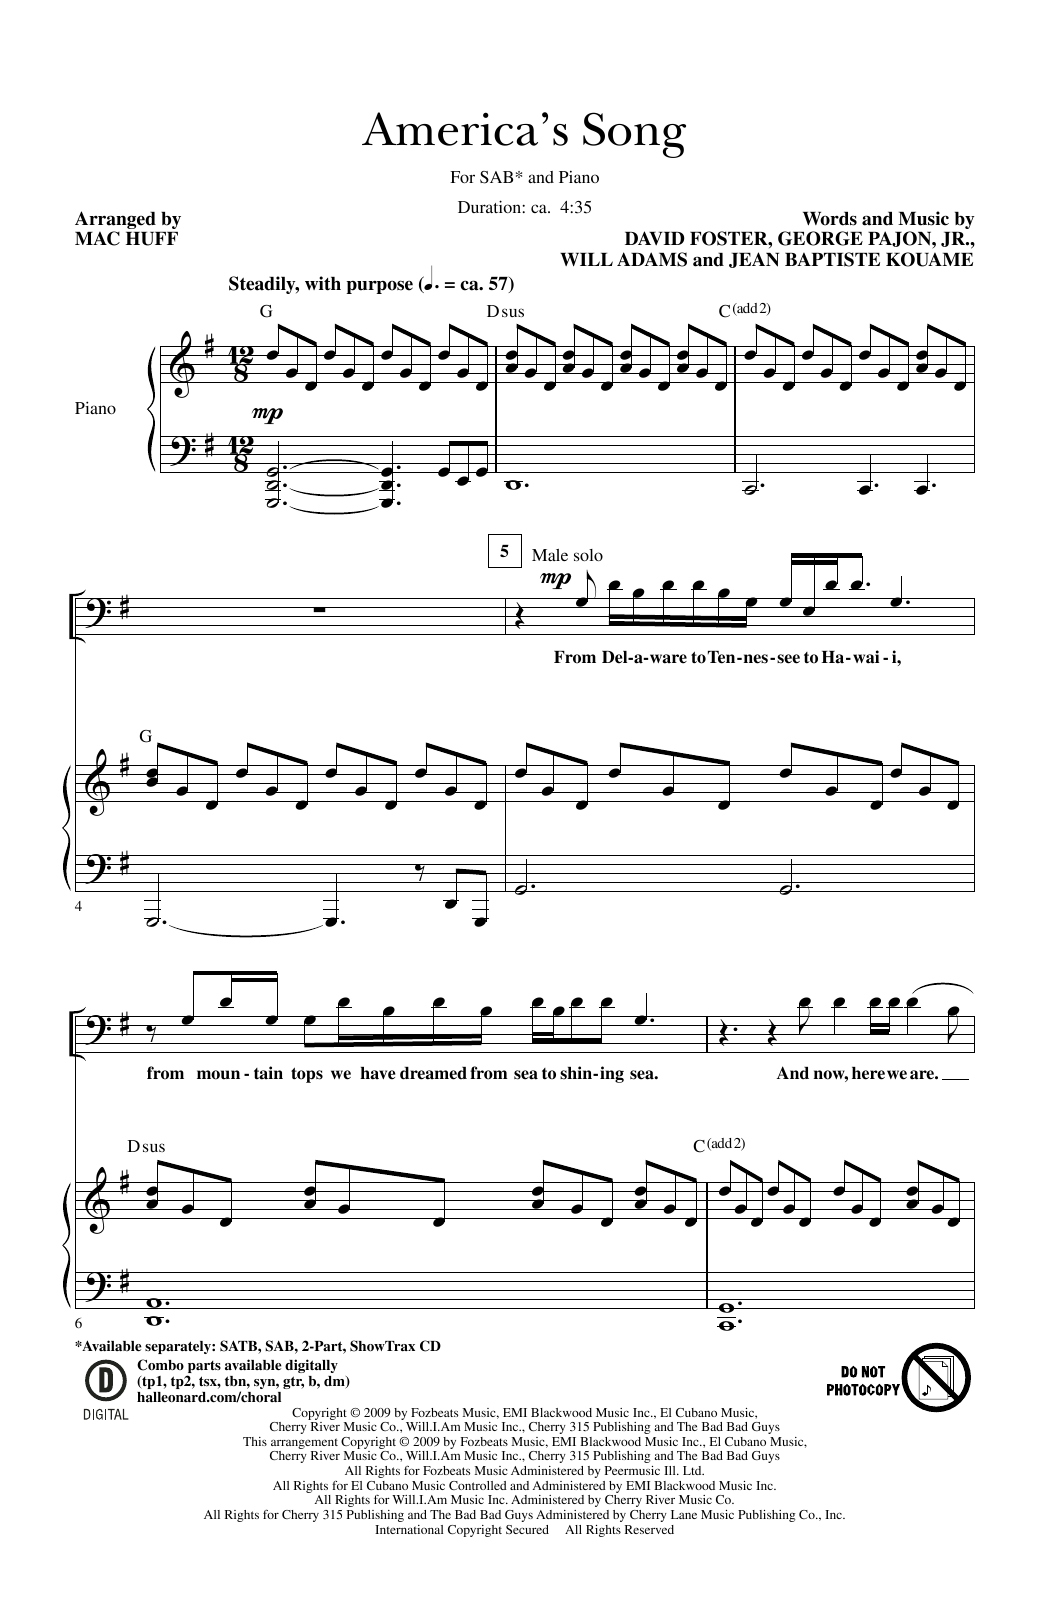 Download will.i.am America's Song (arr. Mac Huff) Sheet Music